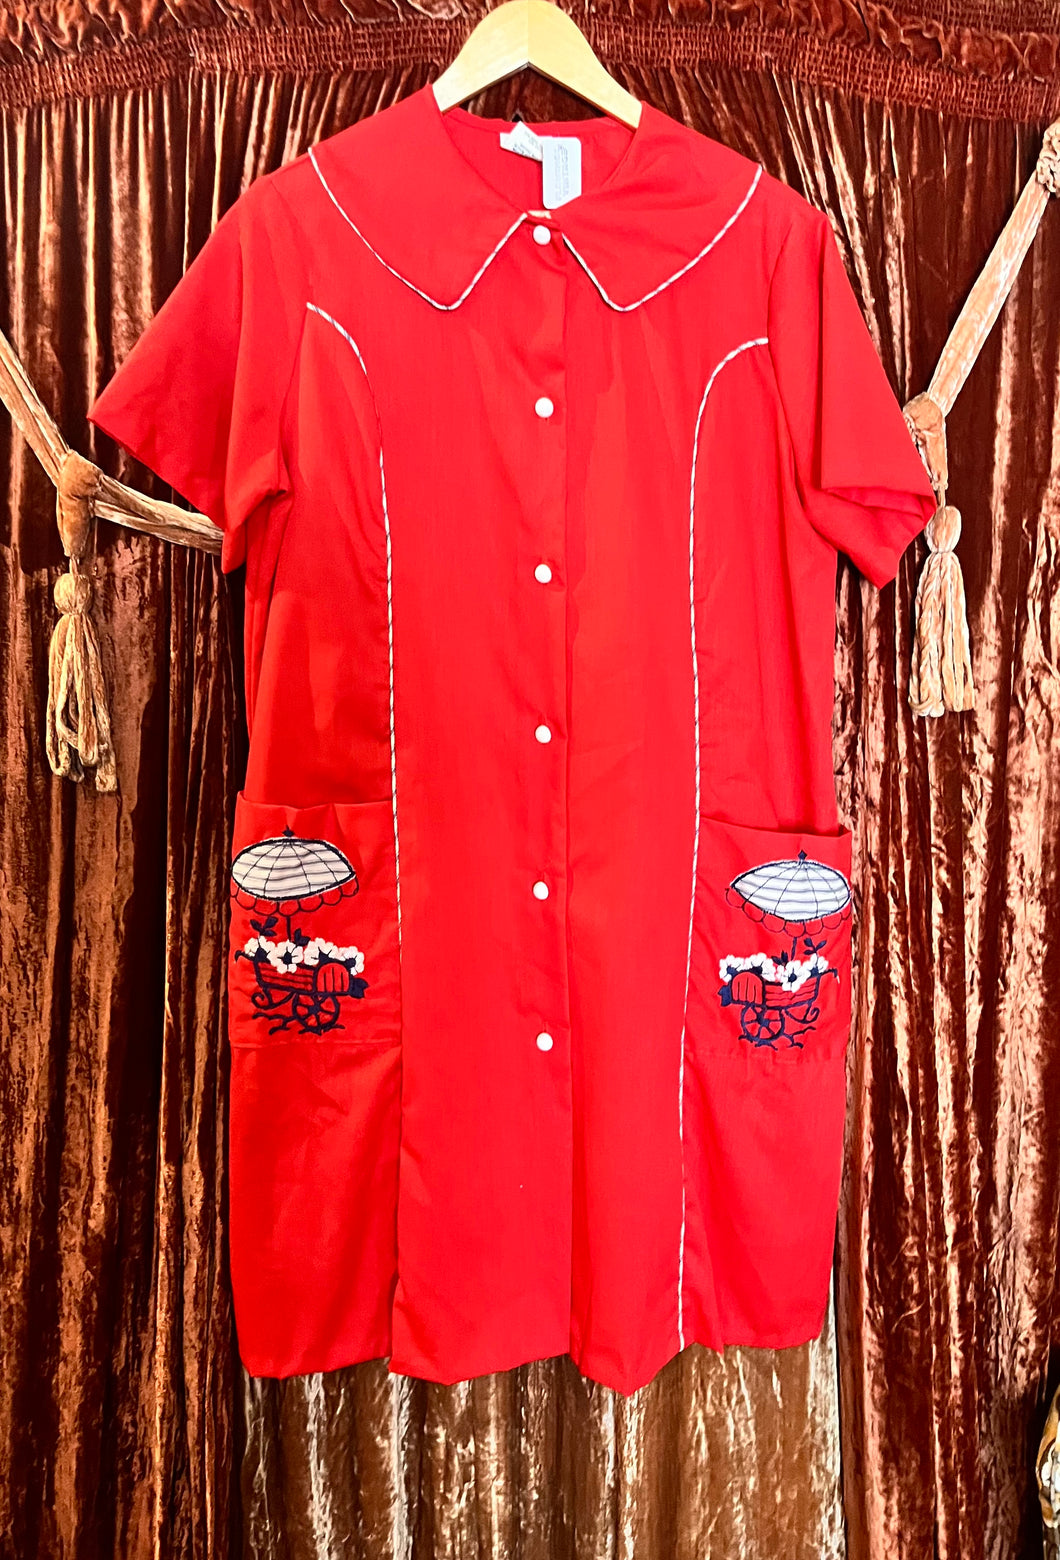 XXL Red Cotton Shift Dress with Peter Pan Collar